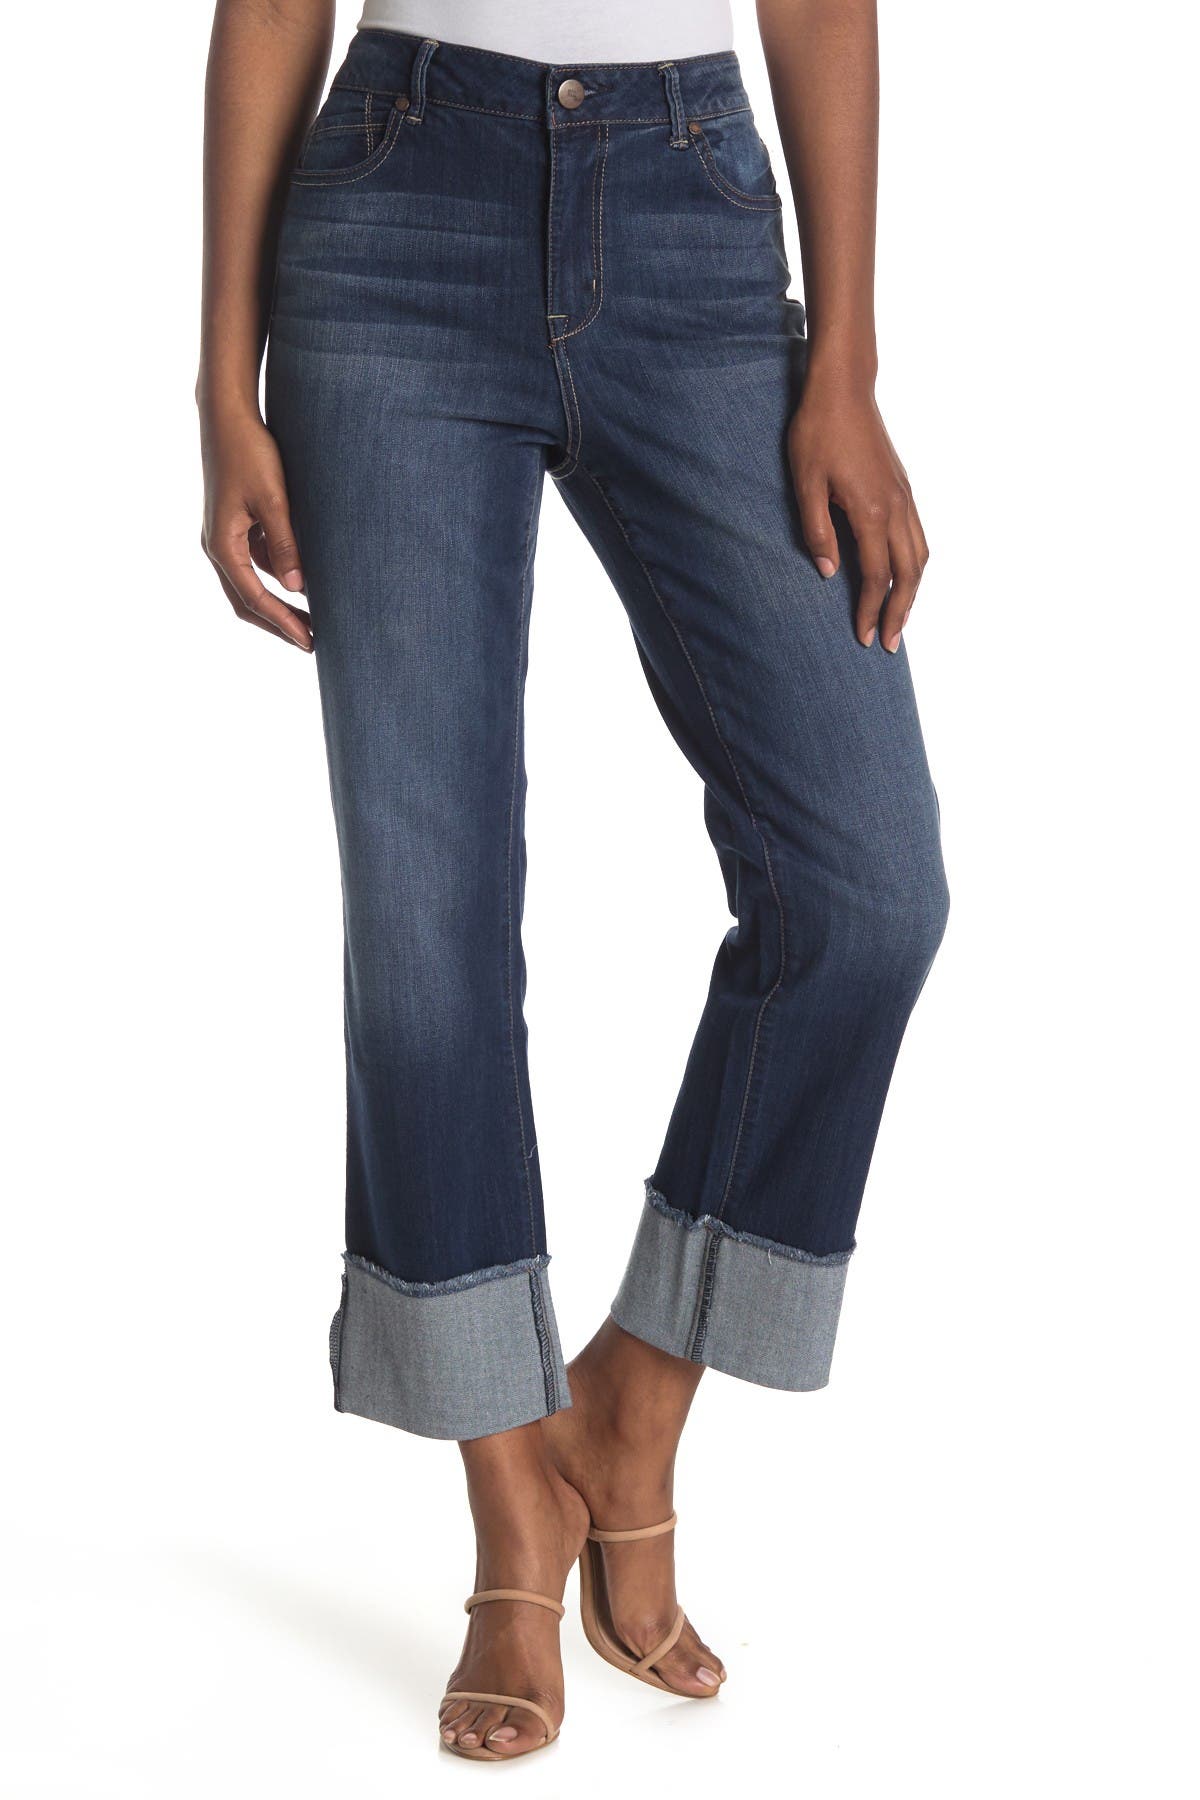 1822 jeans canada